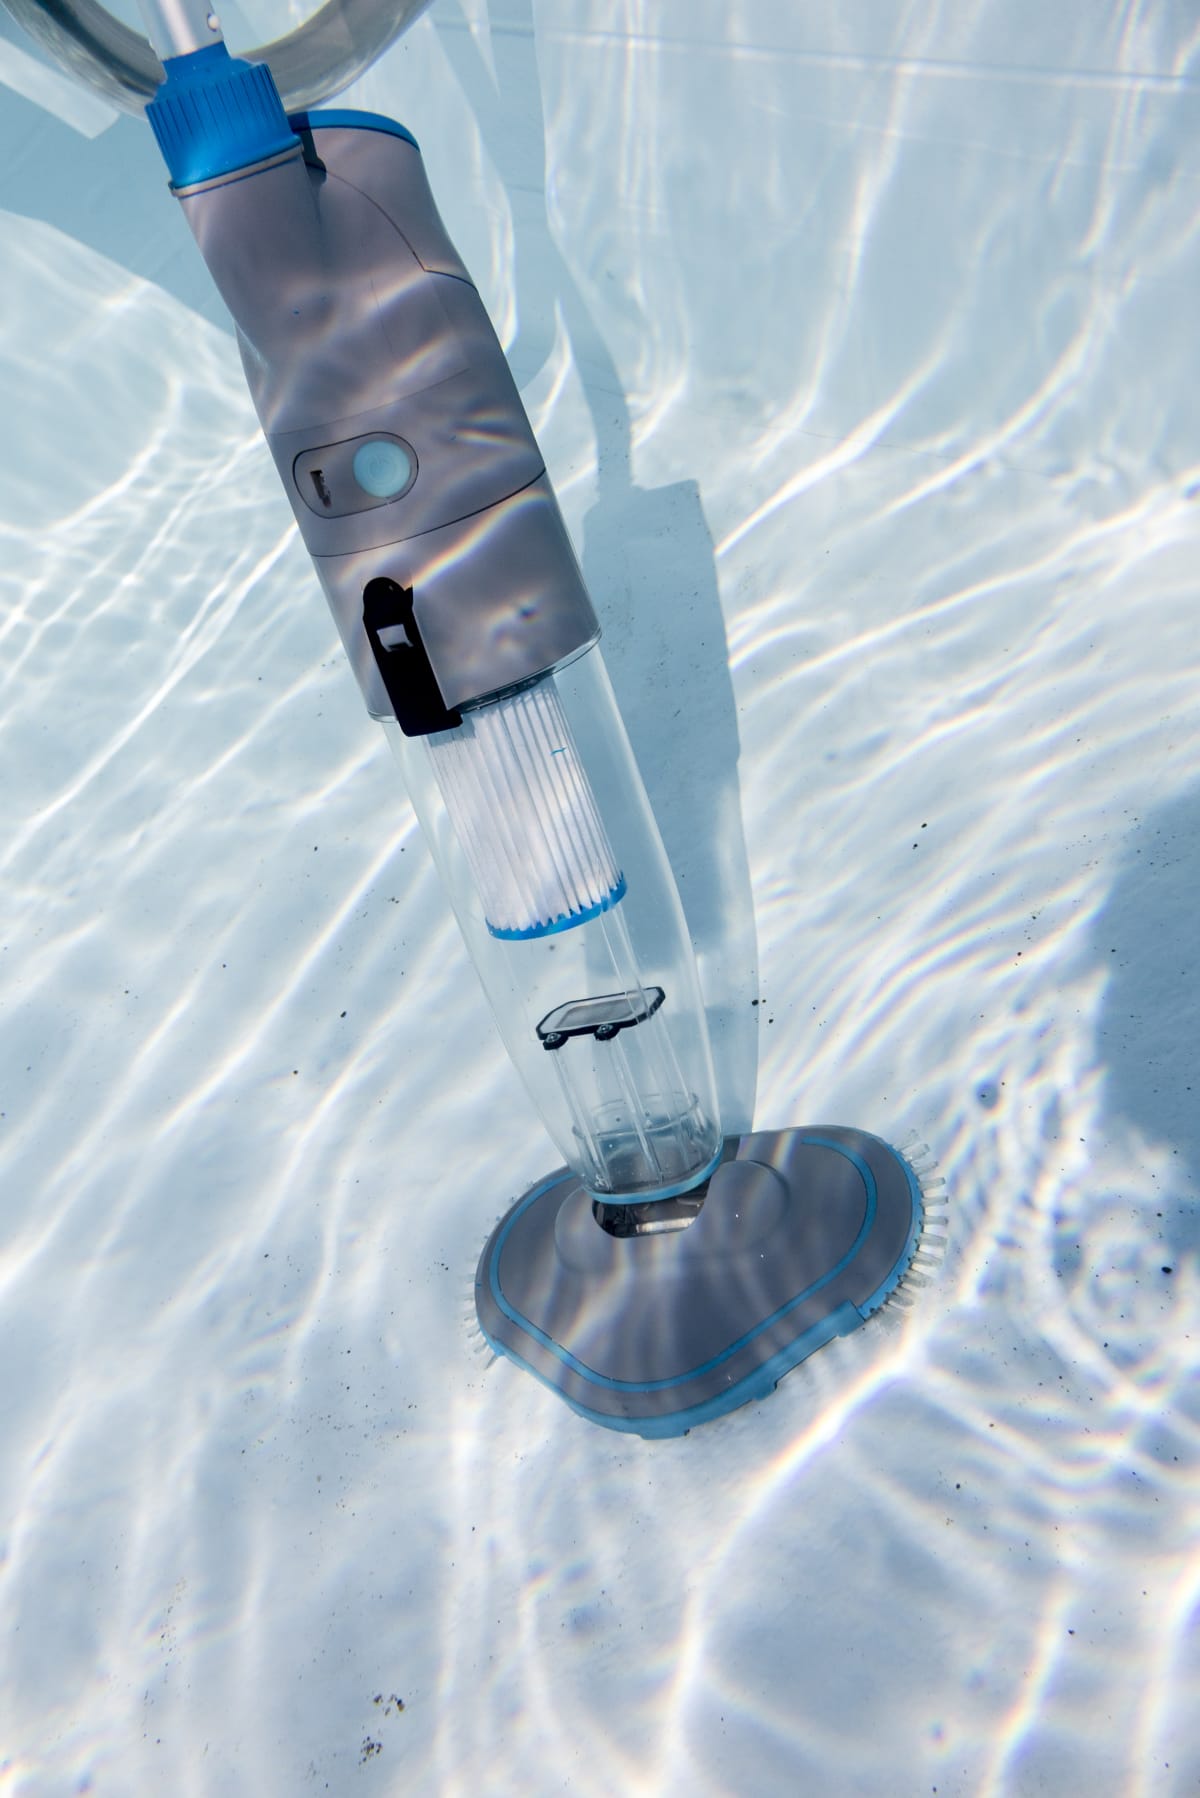 SUPER VAC BATTERY-POWERED POOL CLEANER